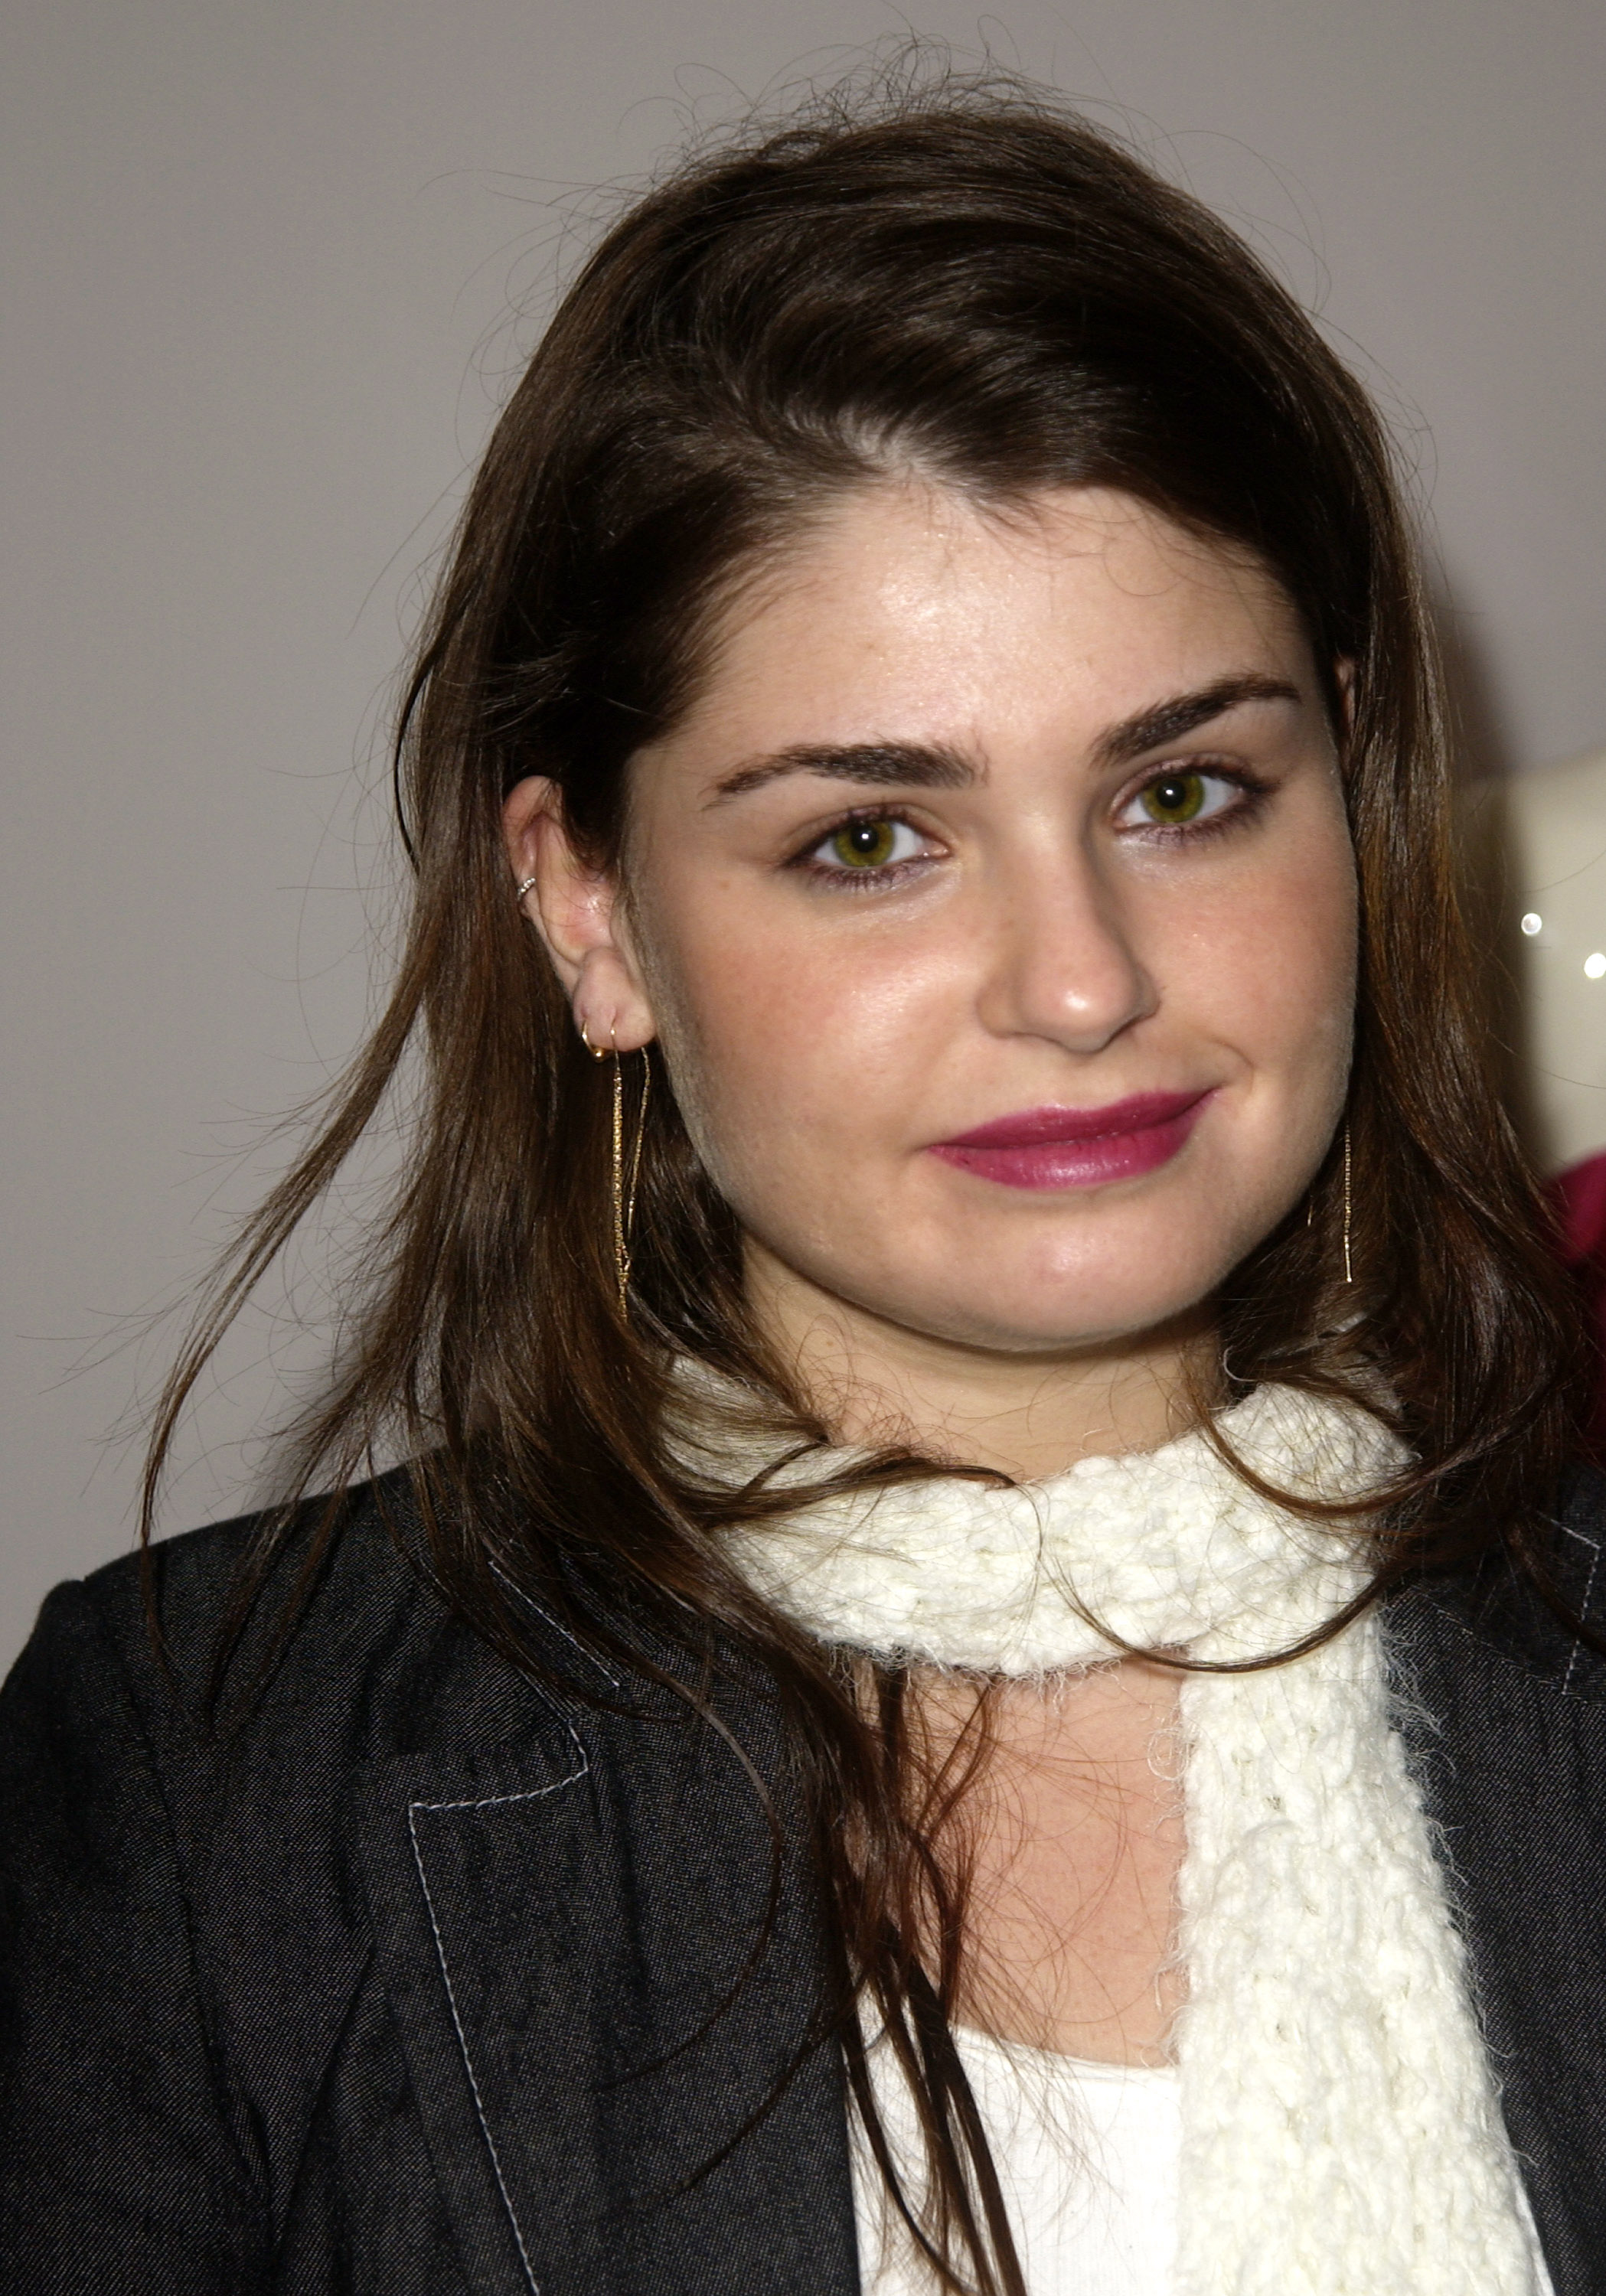 Aimee Osbourne during the Stella McCartney Los Angeles Store Opening on September 28, 2003 in Los Angeles, California | Source: Getty Images